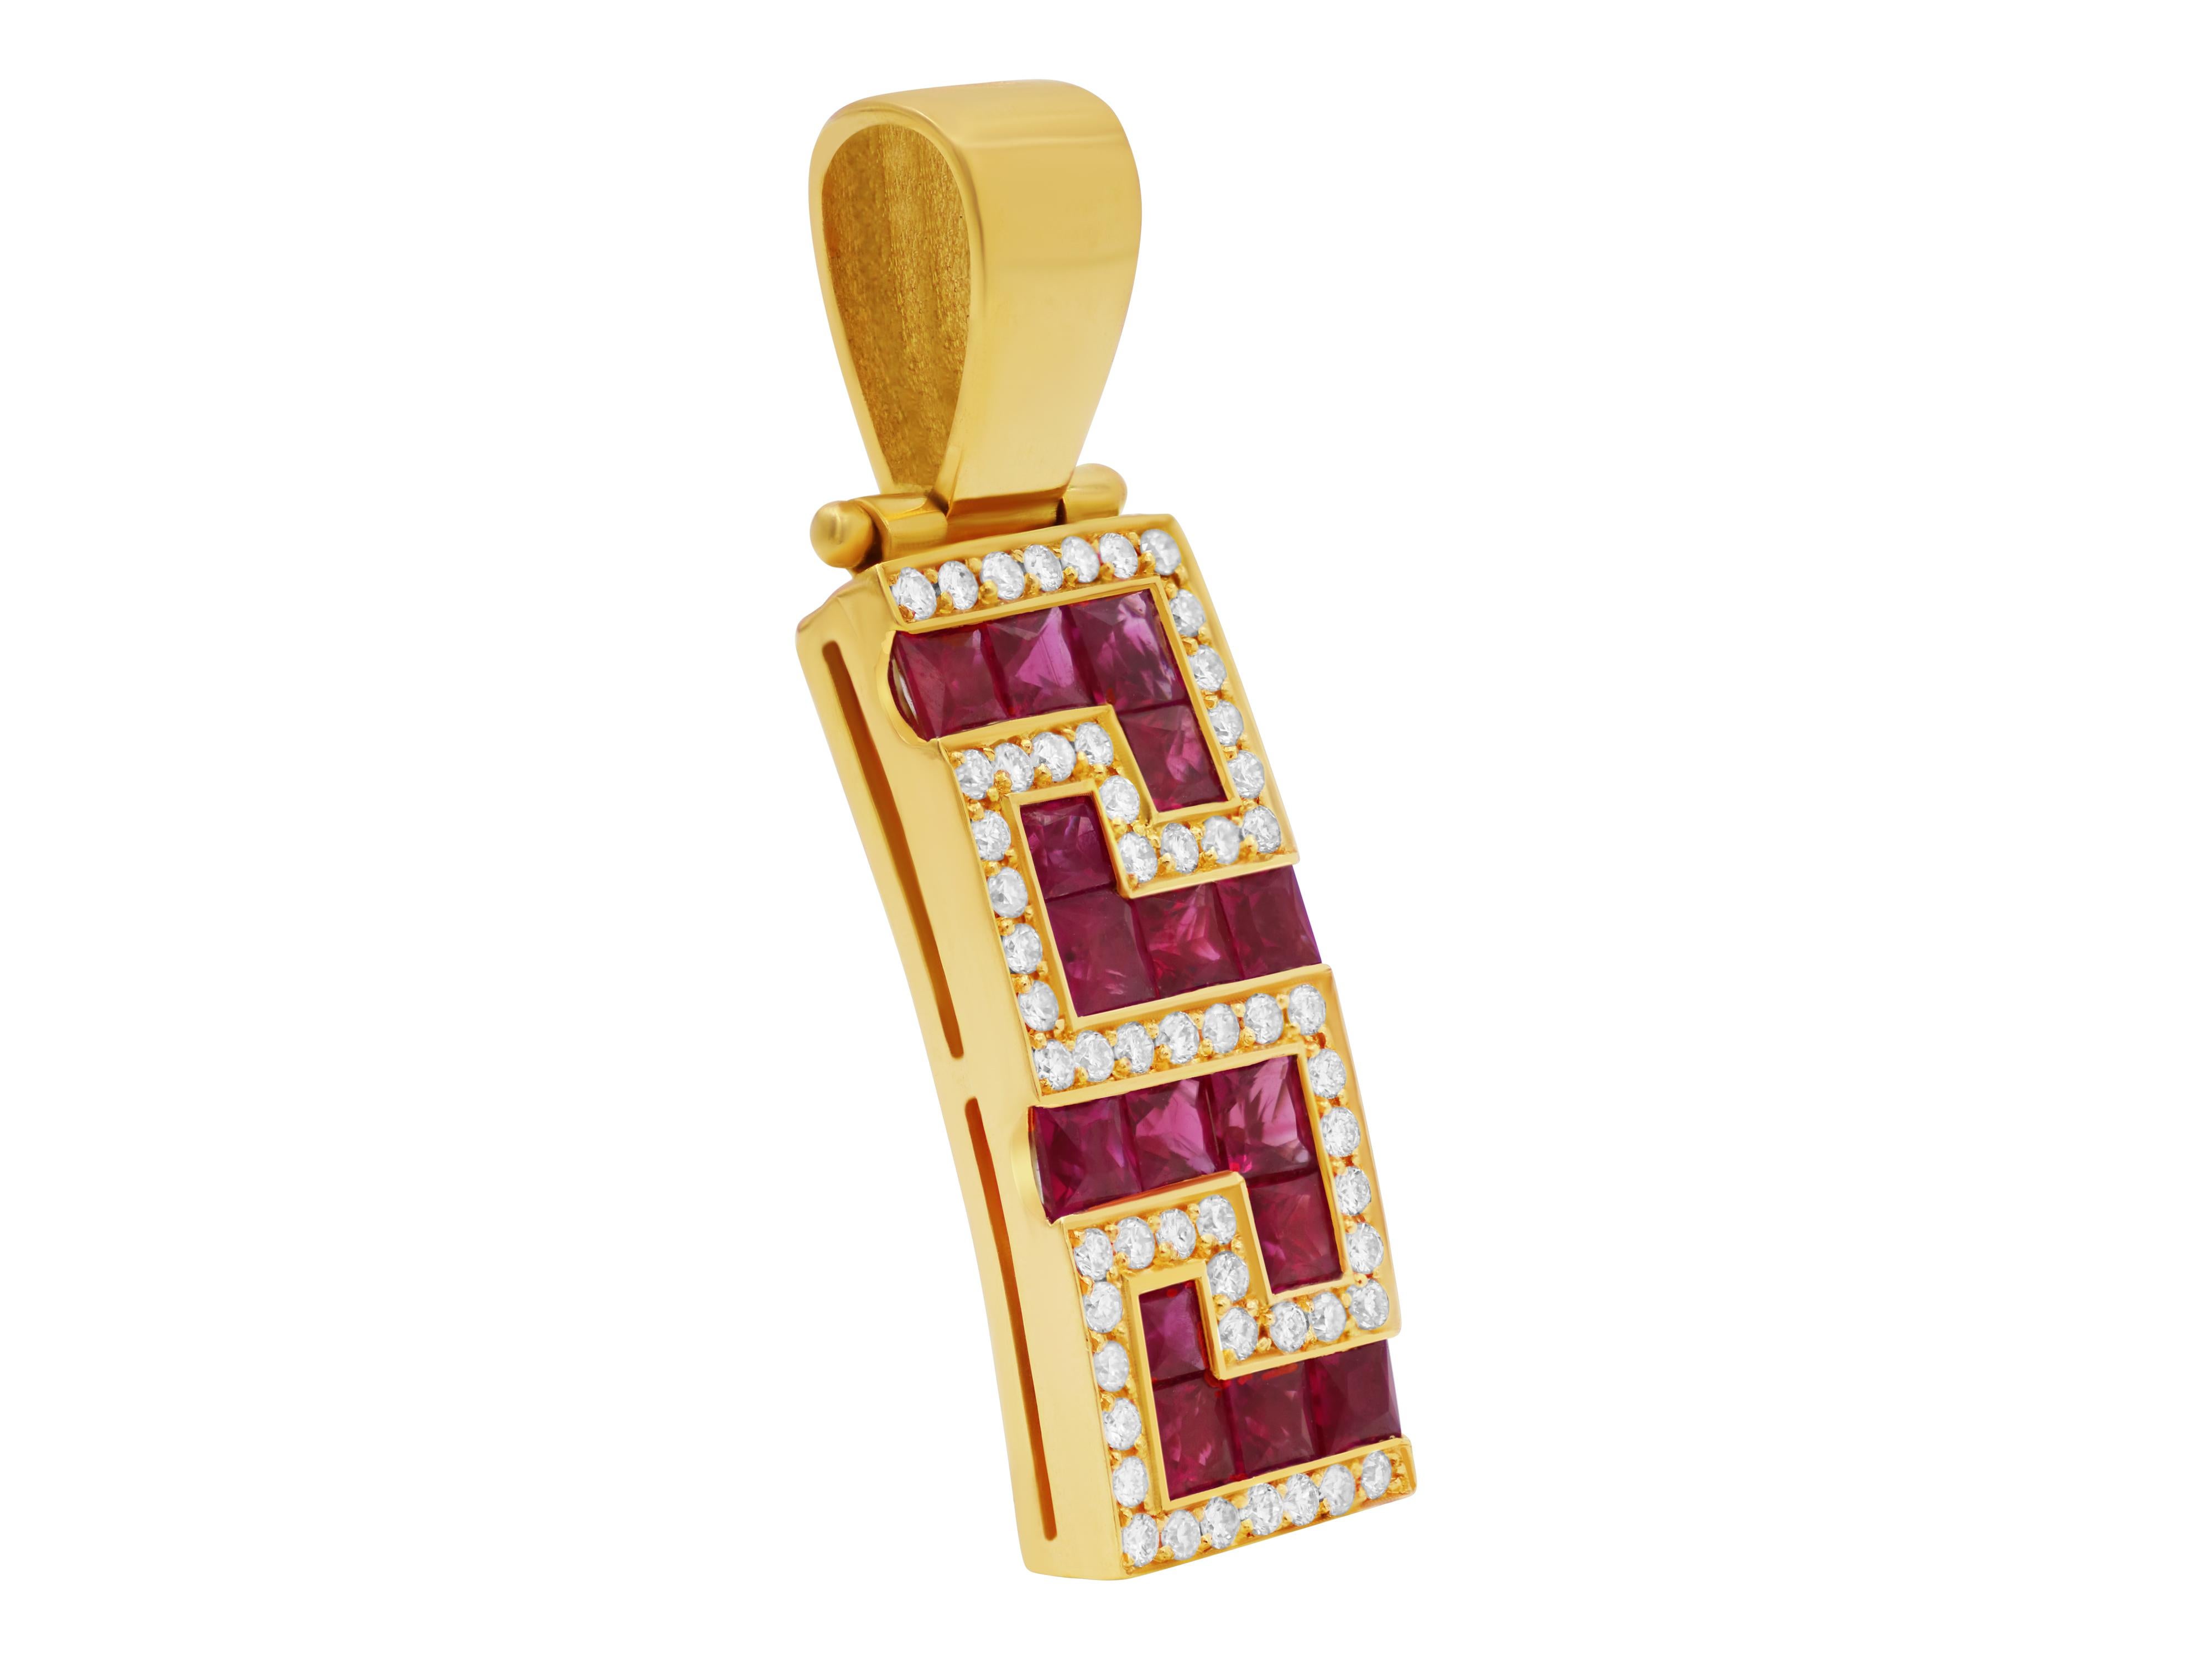 Classical Greek Dimos 18k Gold Greek Key Cocktail Rubies and Diamonds Pendant For Sale